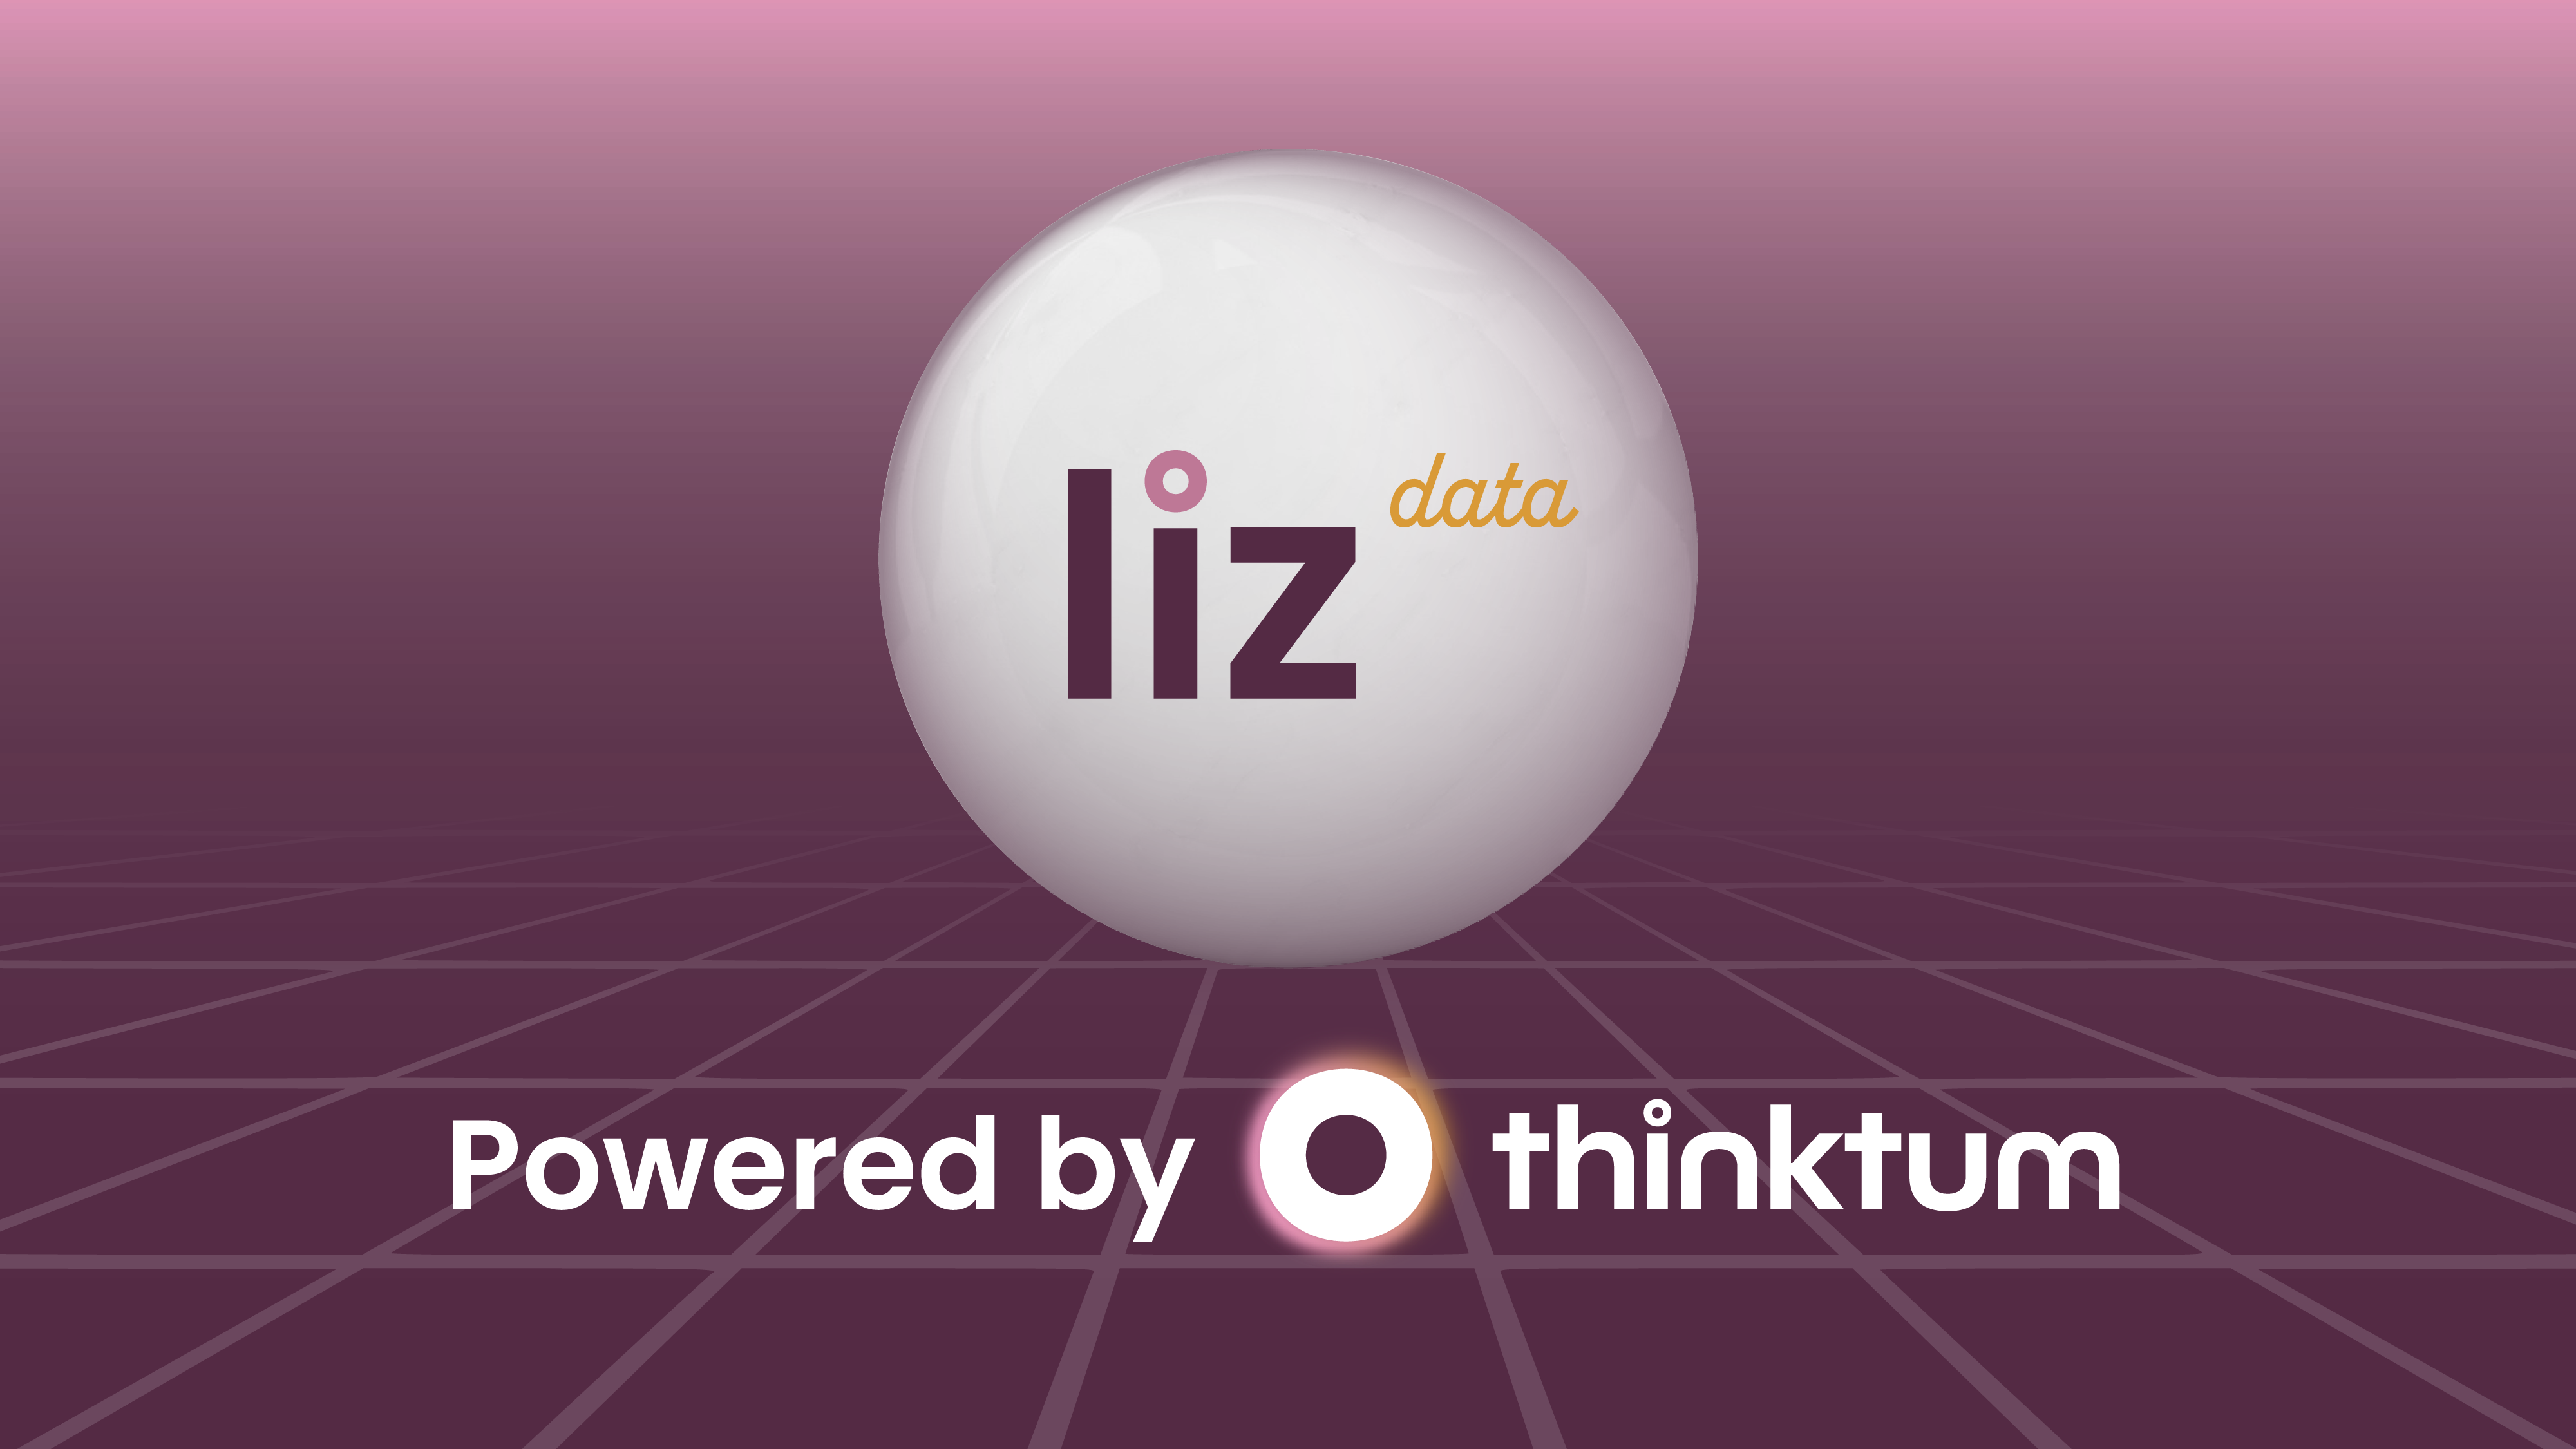 Purple background, white circle with liz data on the circle and Powered by thinktum below with our circle.